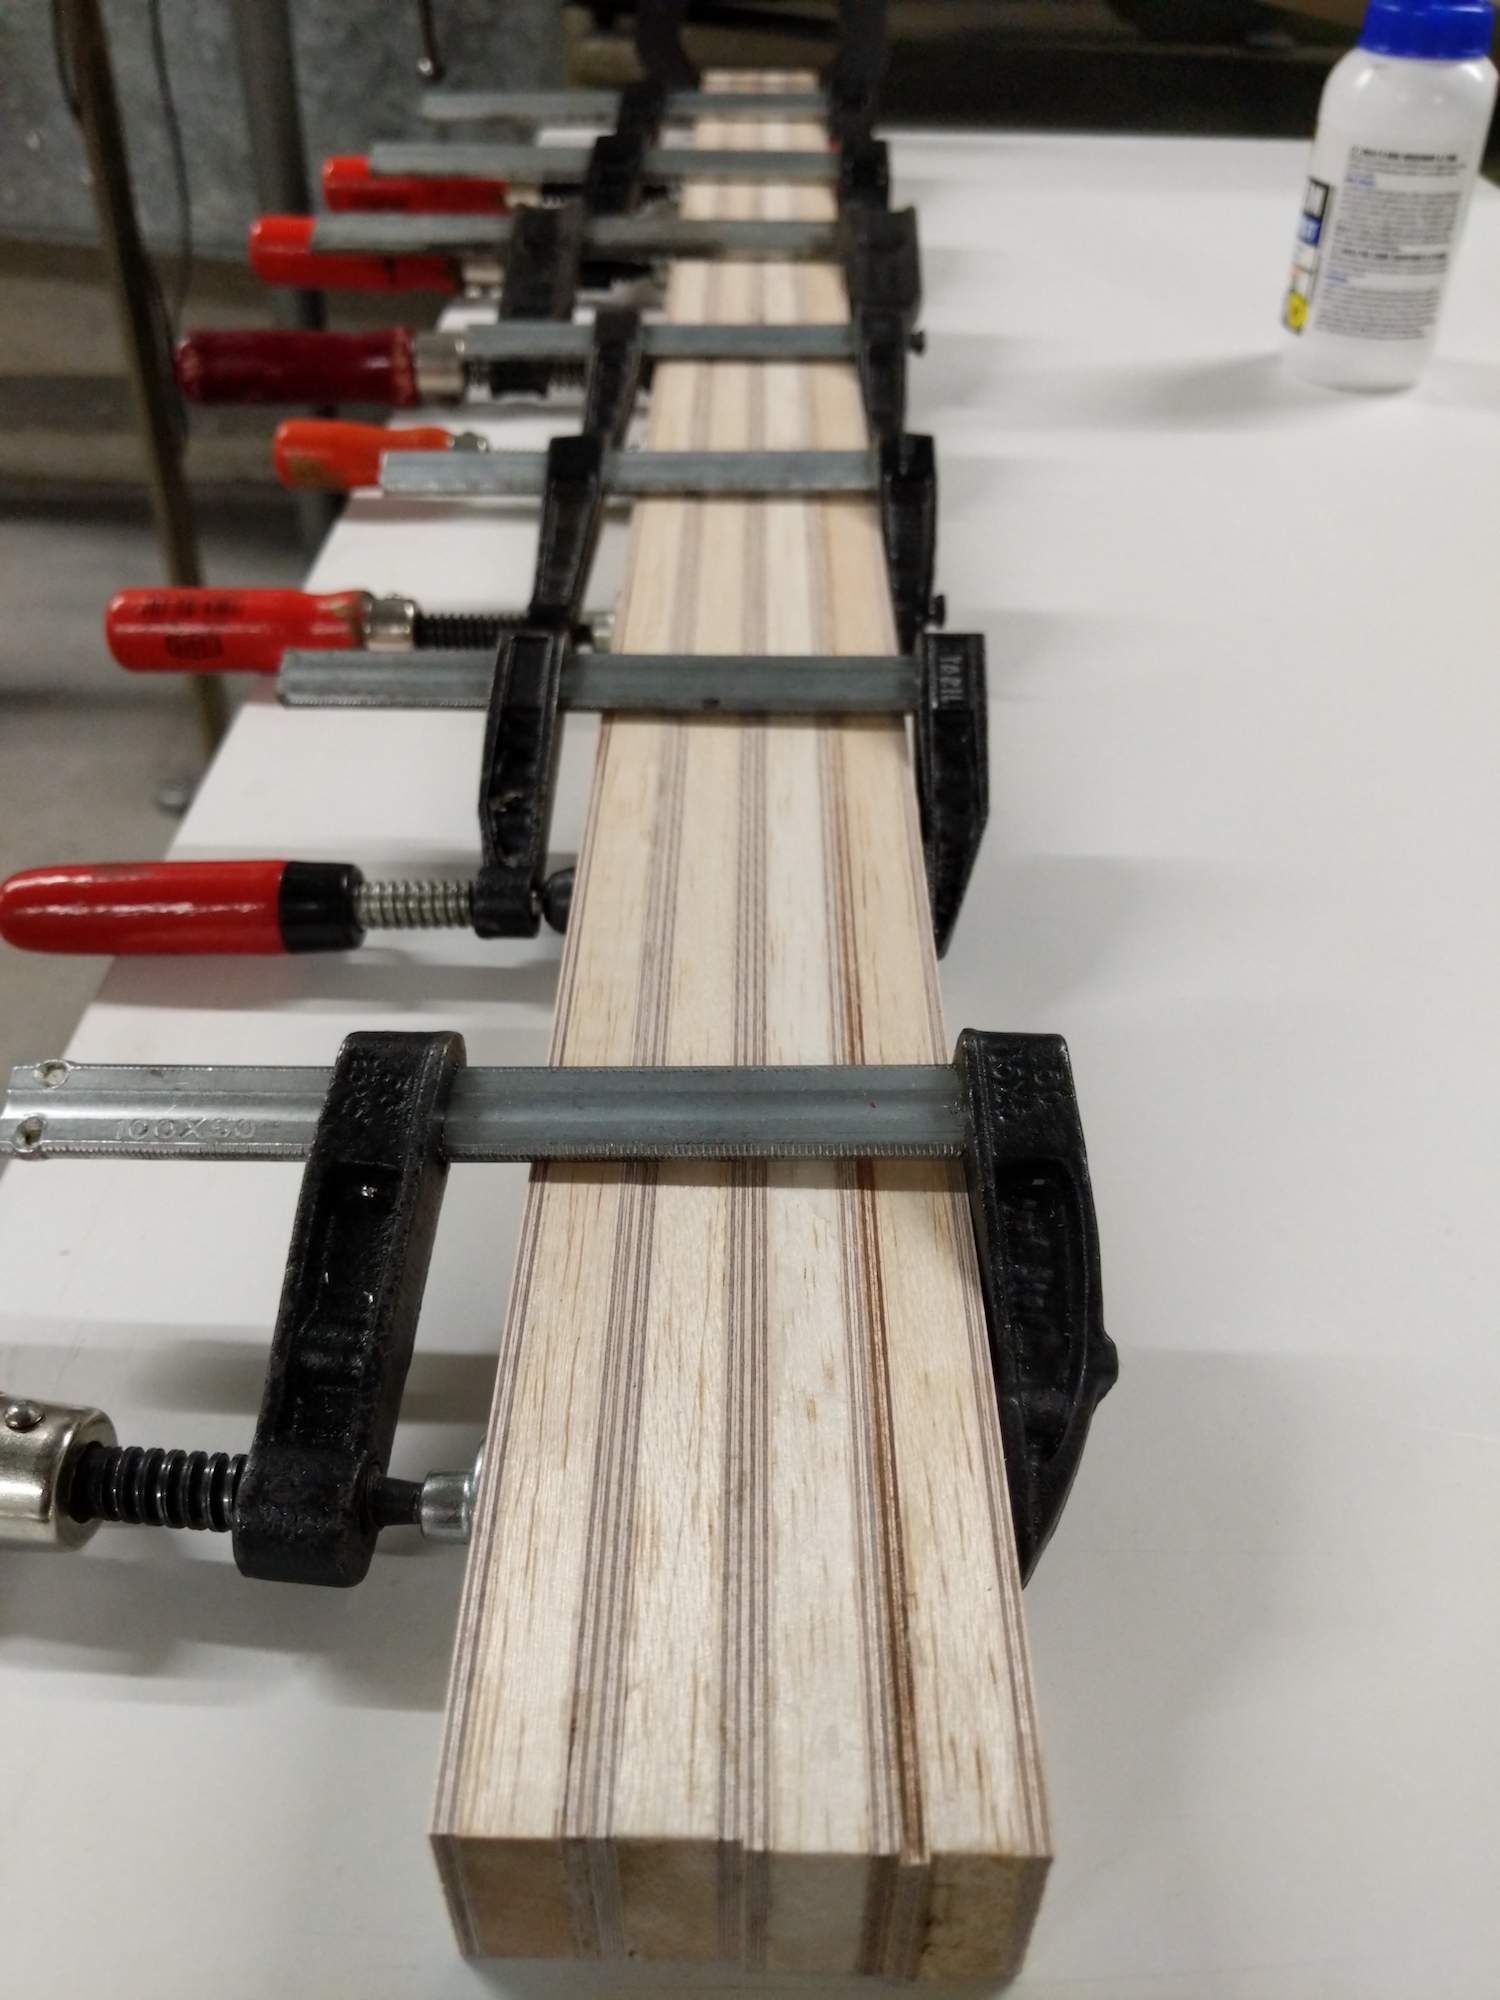 Gluing of the plywood balsa stringers